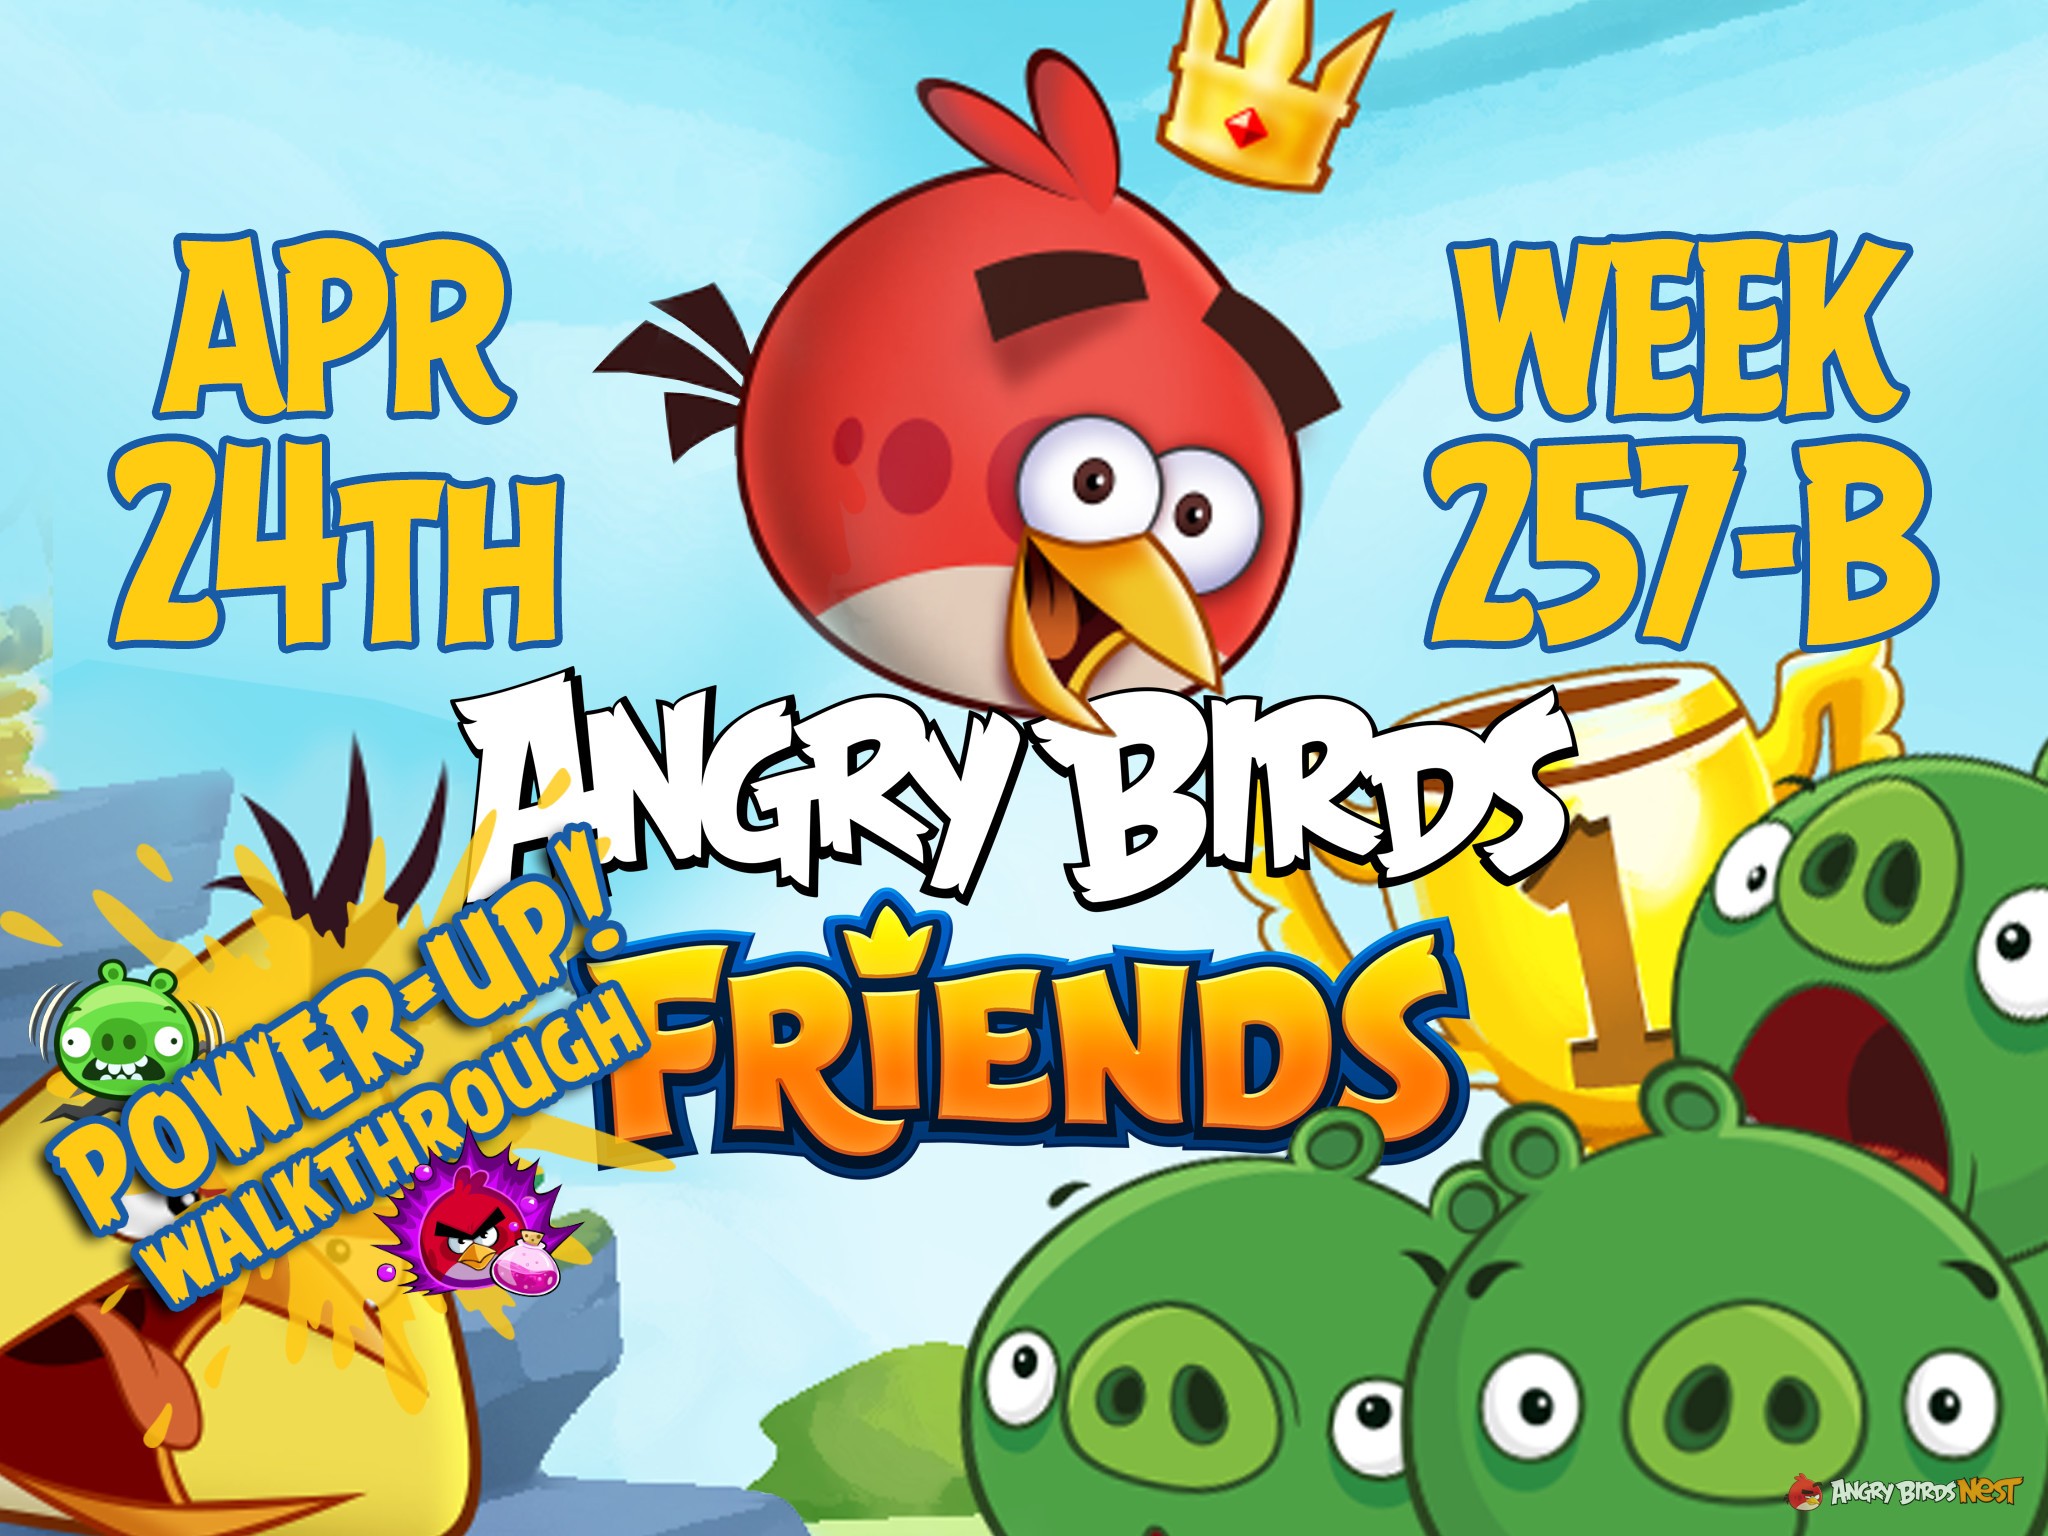 Angry Birds Friends Tournament Week 257-B Feature Image PU